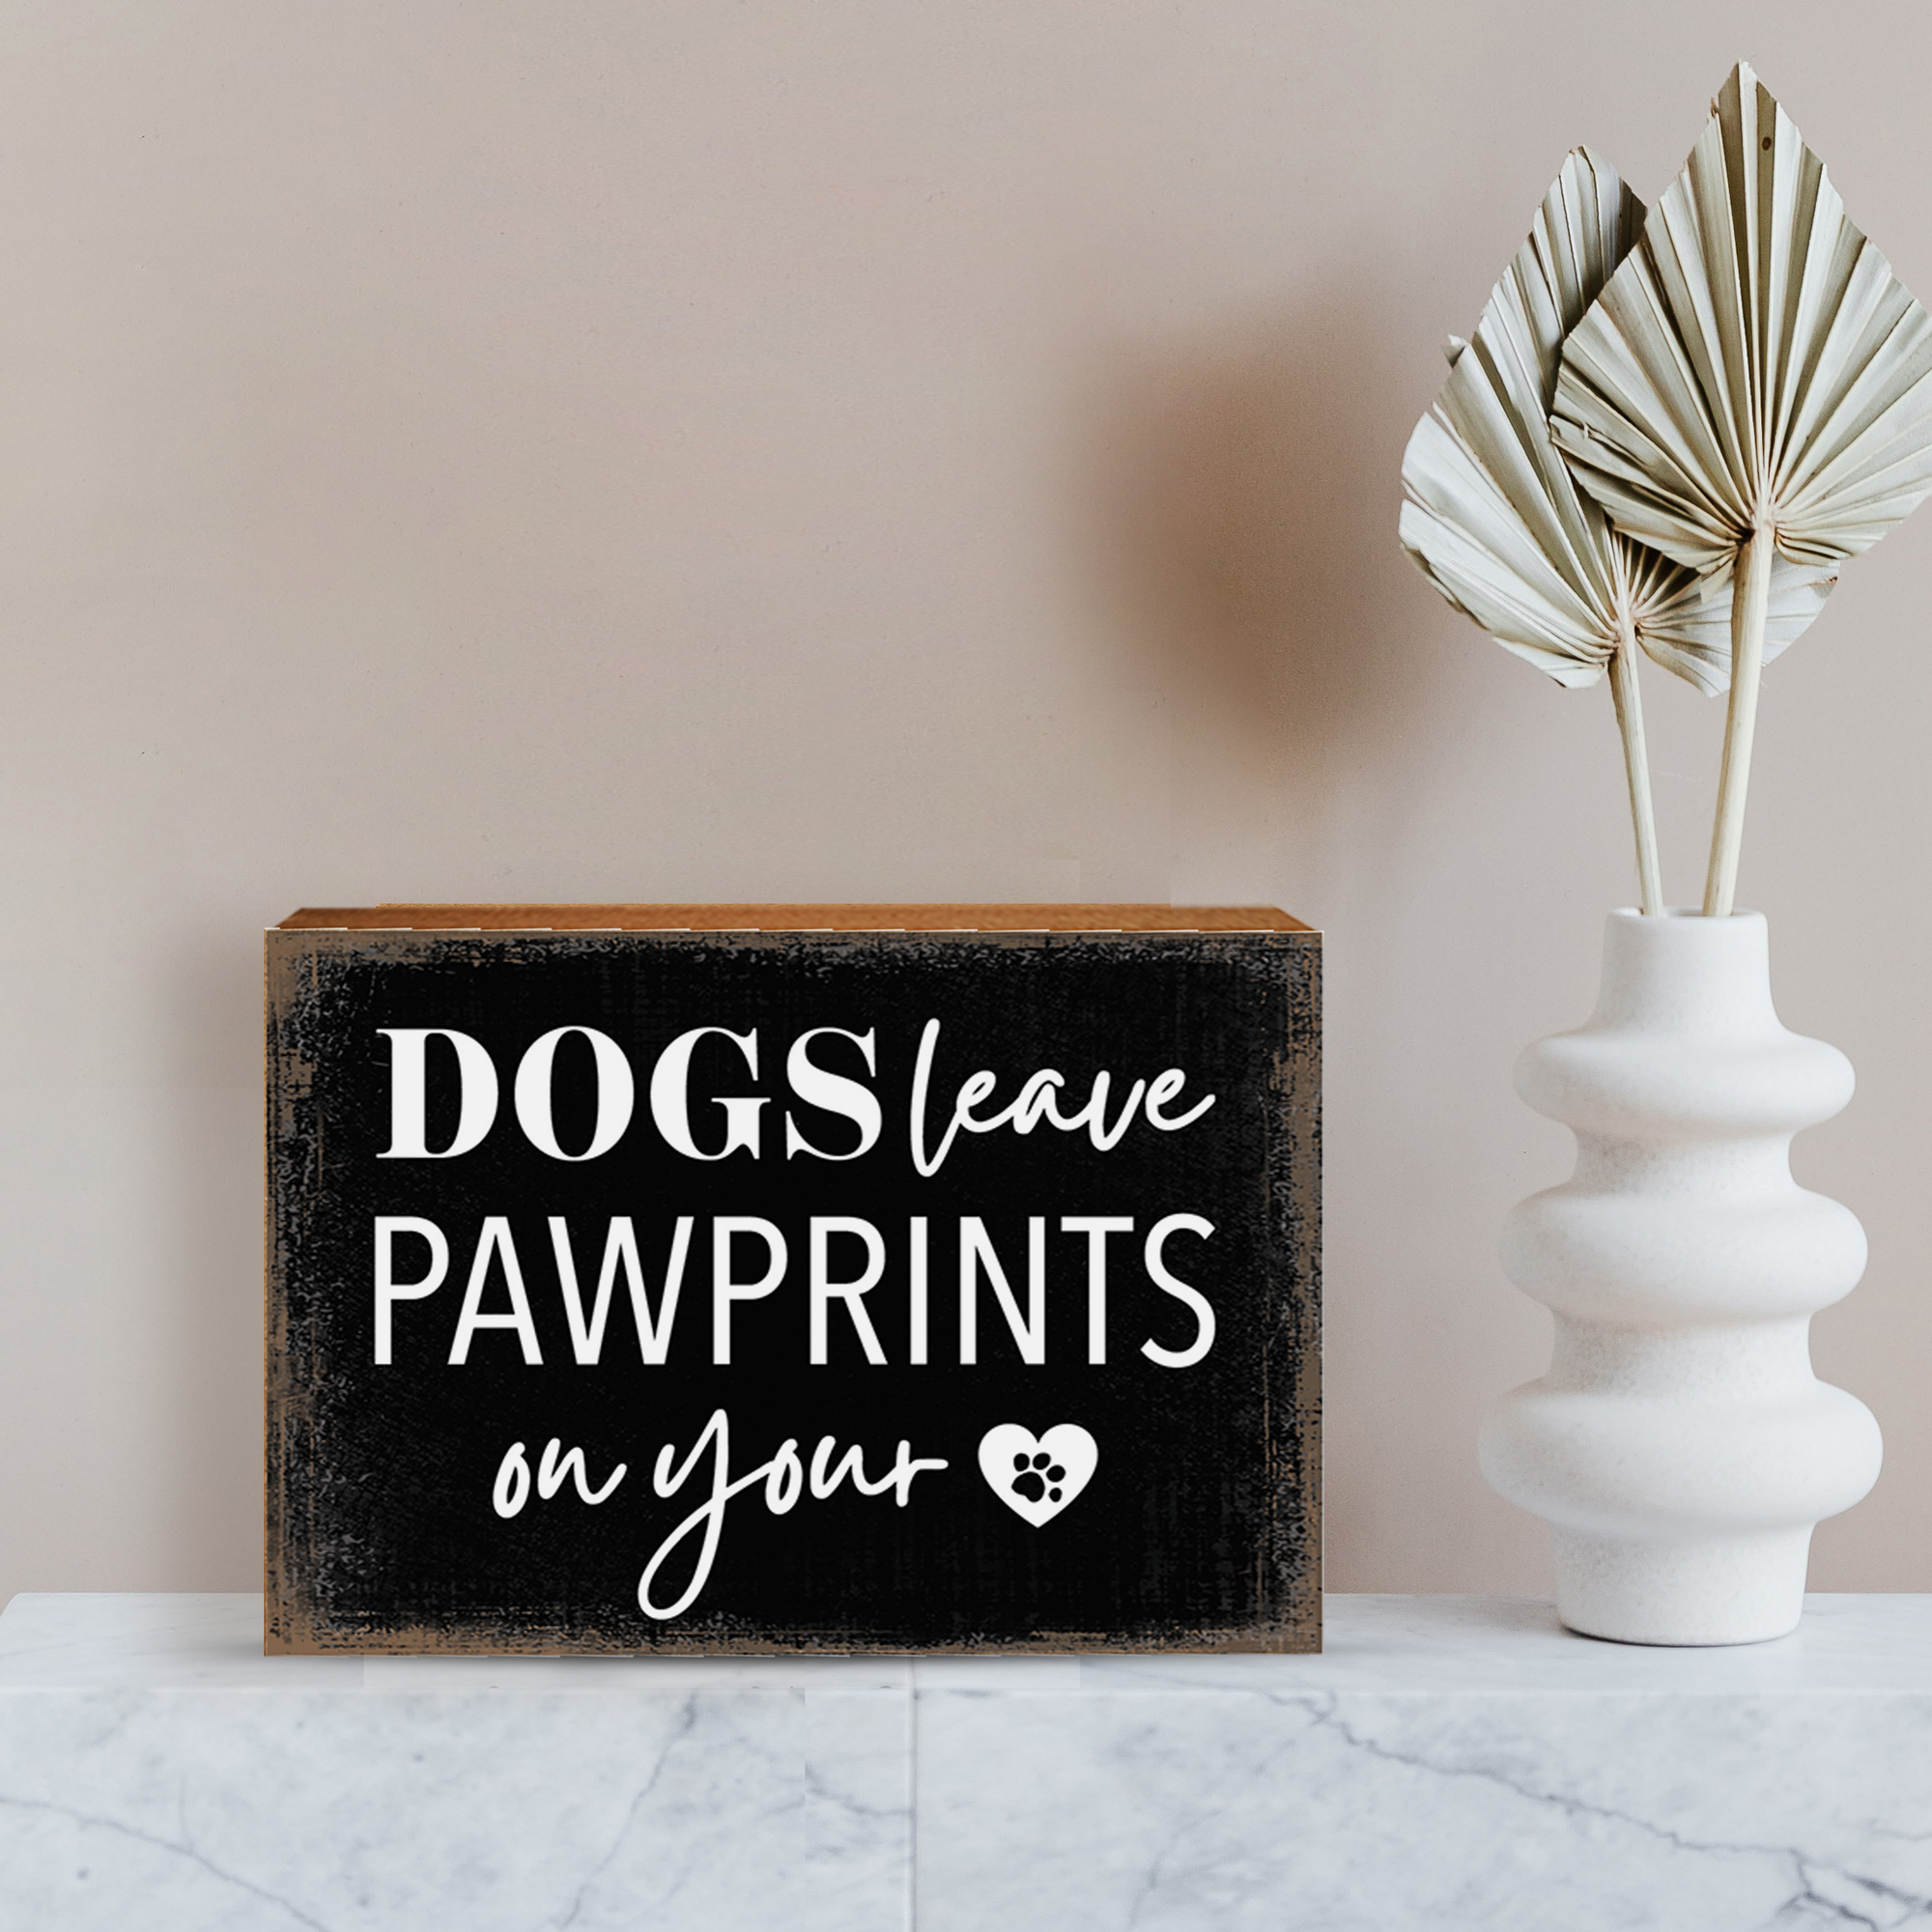 Wooden Shelf Decor and Tabletop Signs with Pet Verses - On Your Heart